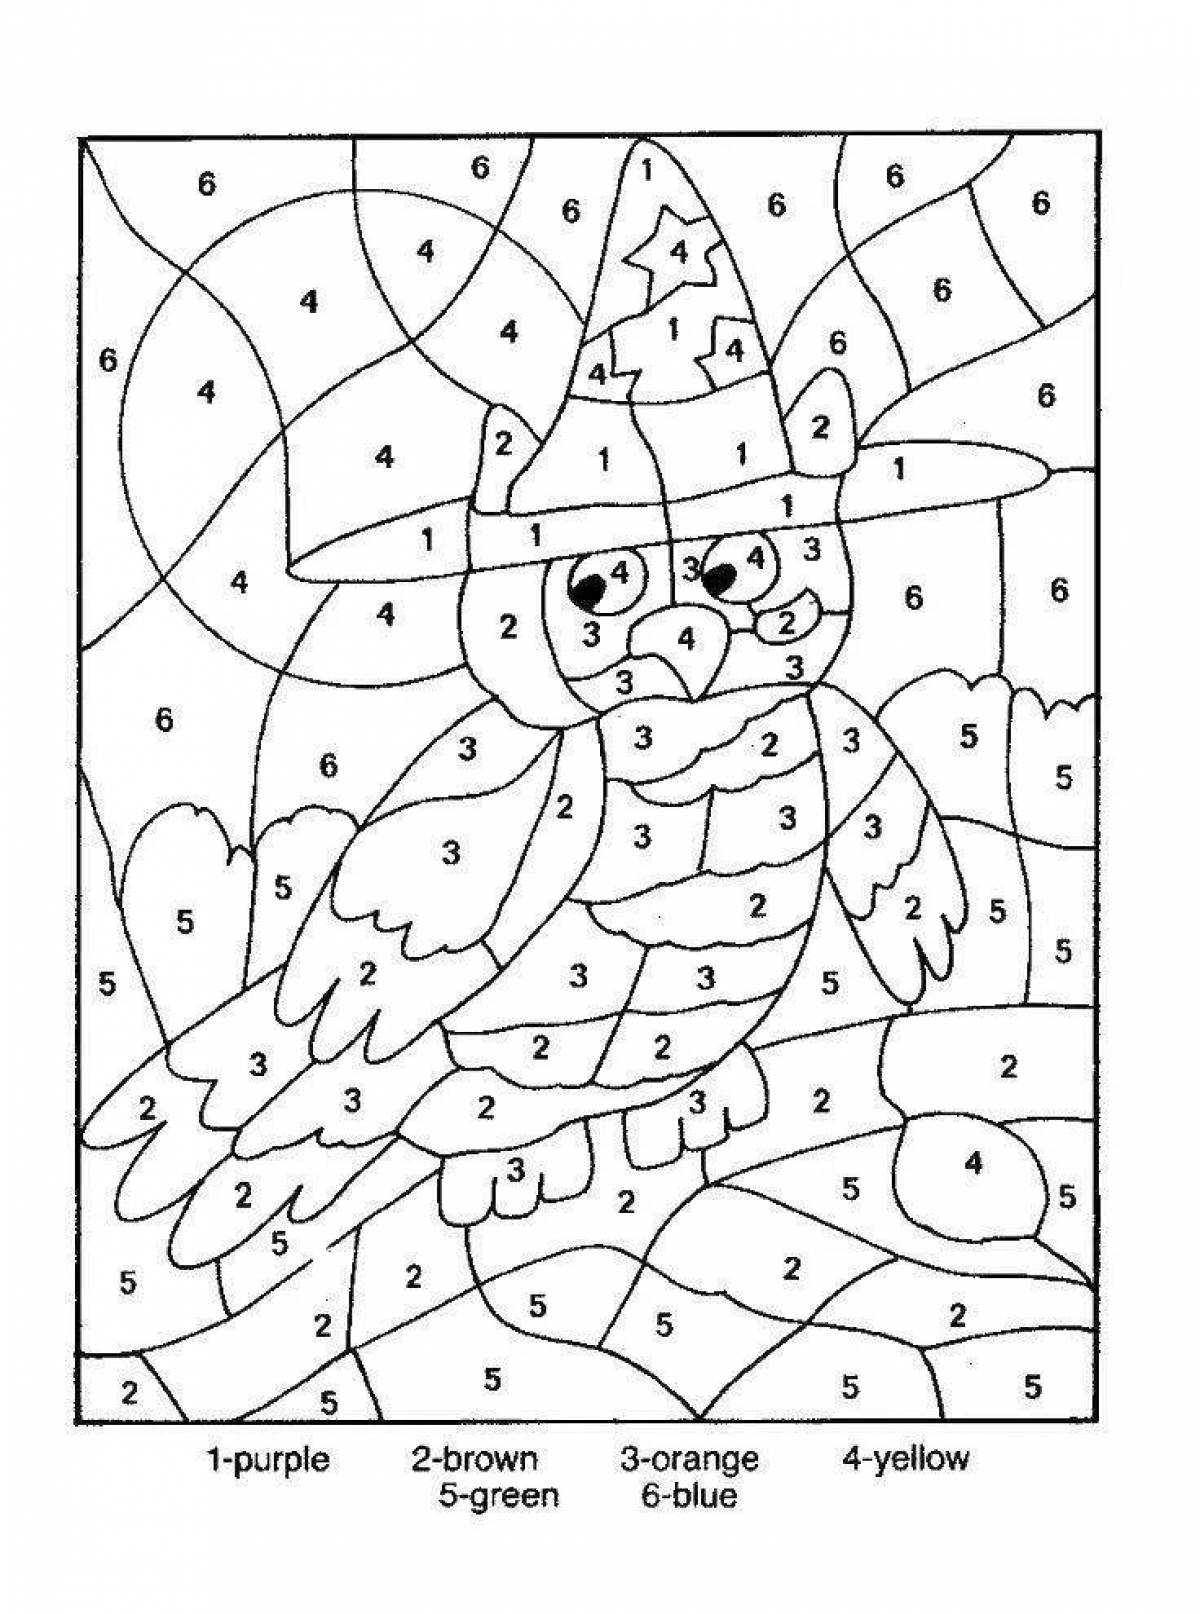 Dazzling owl coloring by numbers